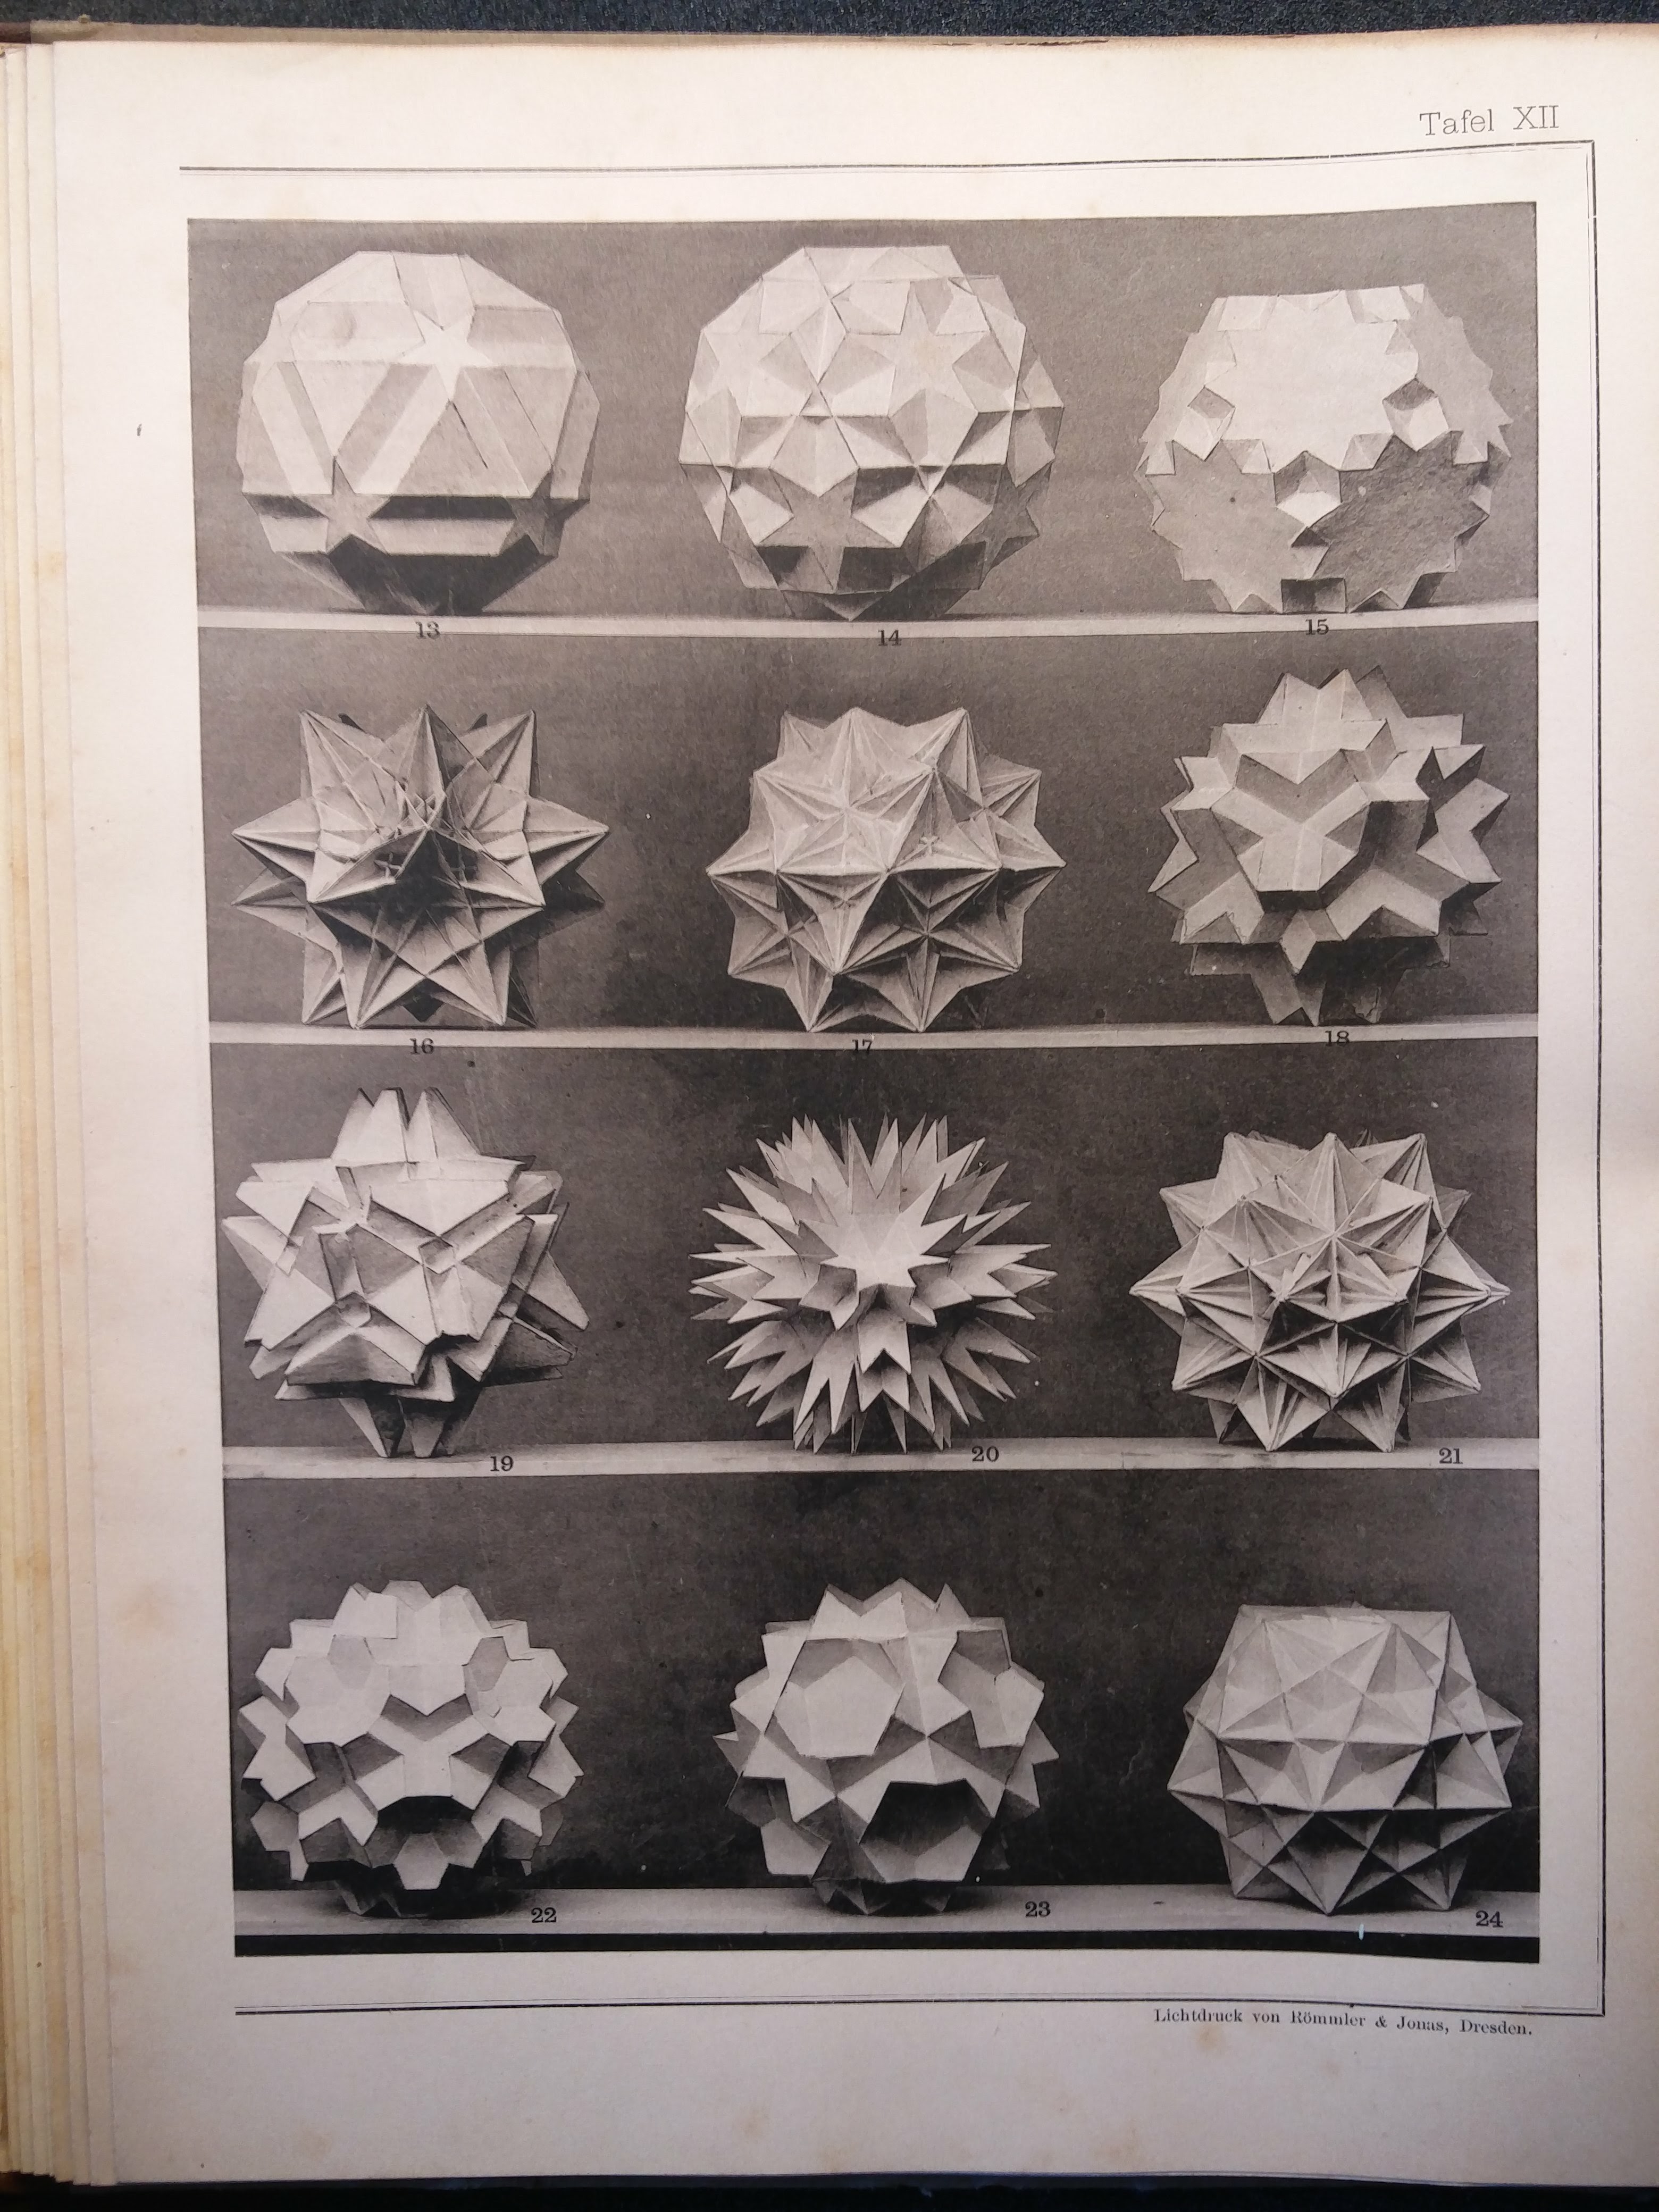 "Brückner’s Vielecke und Vielflache (1900, Leipzig – Bodleian RSL 1832 d. 13) is both a theoretical and practical exploration of platonic and geometric solids, finished off with photographs of actual models made by Brückner"